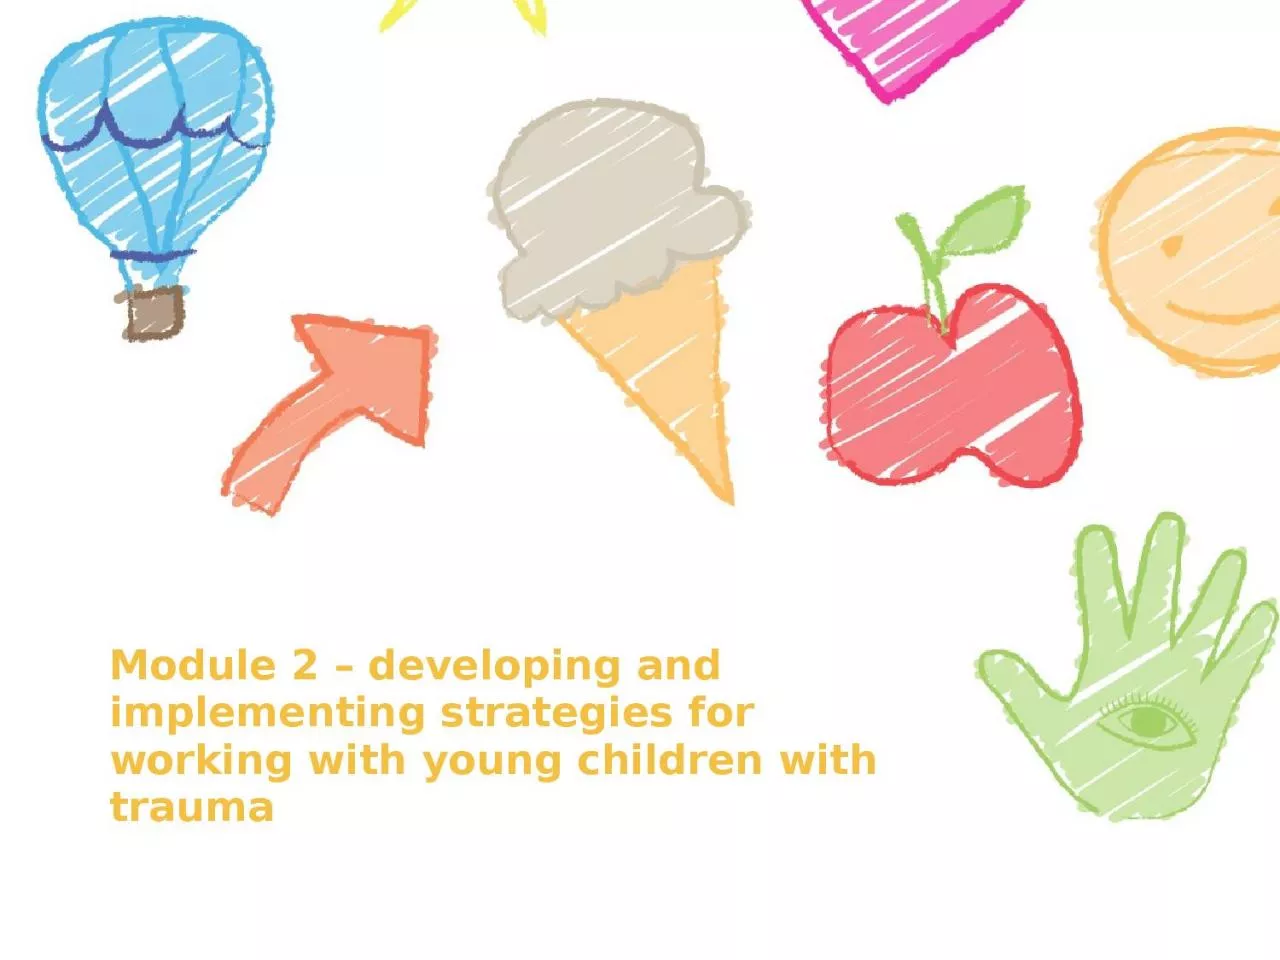 Module 2 – developing and implementing strategies for working with young children with